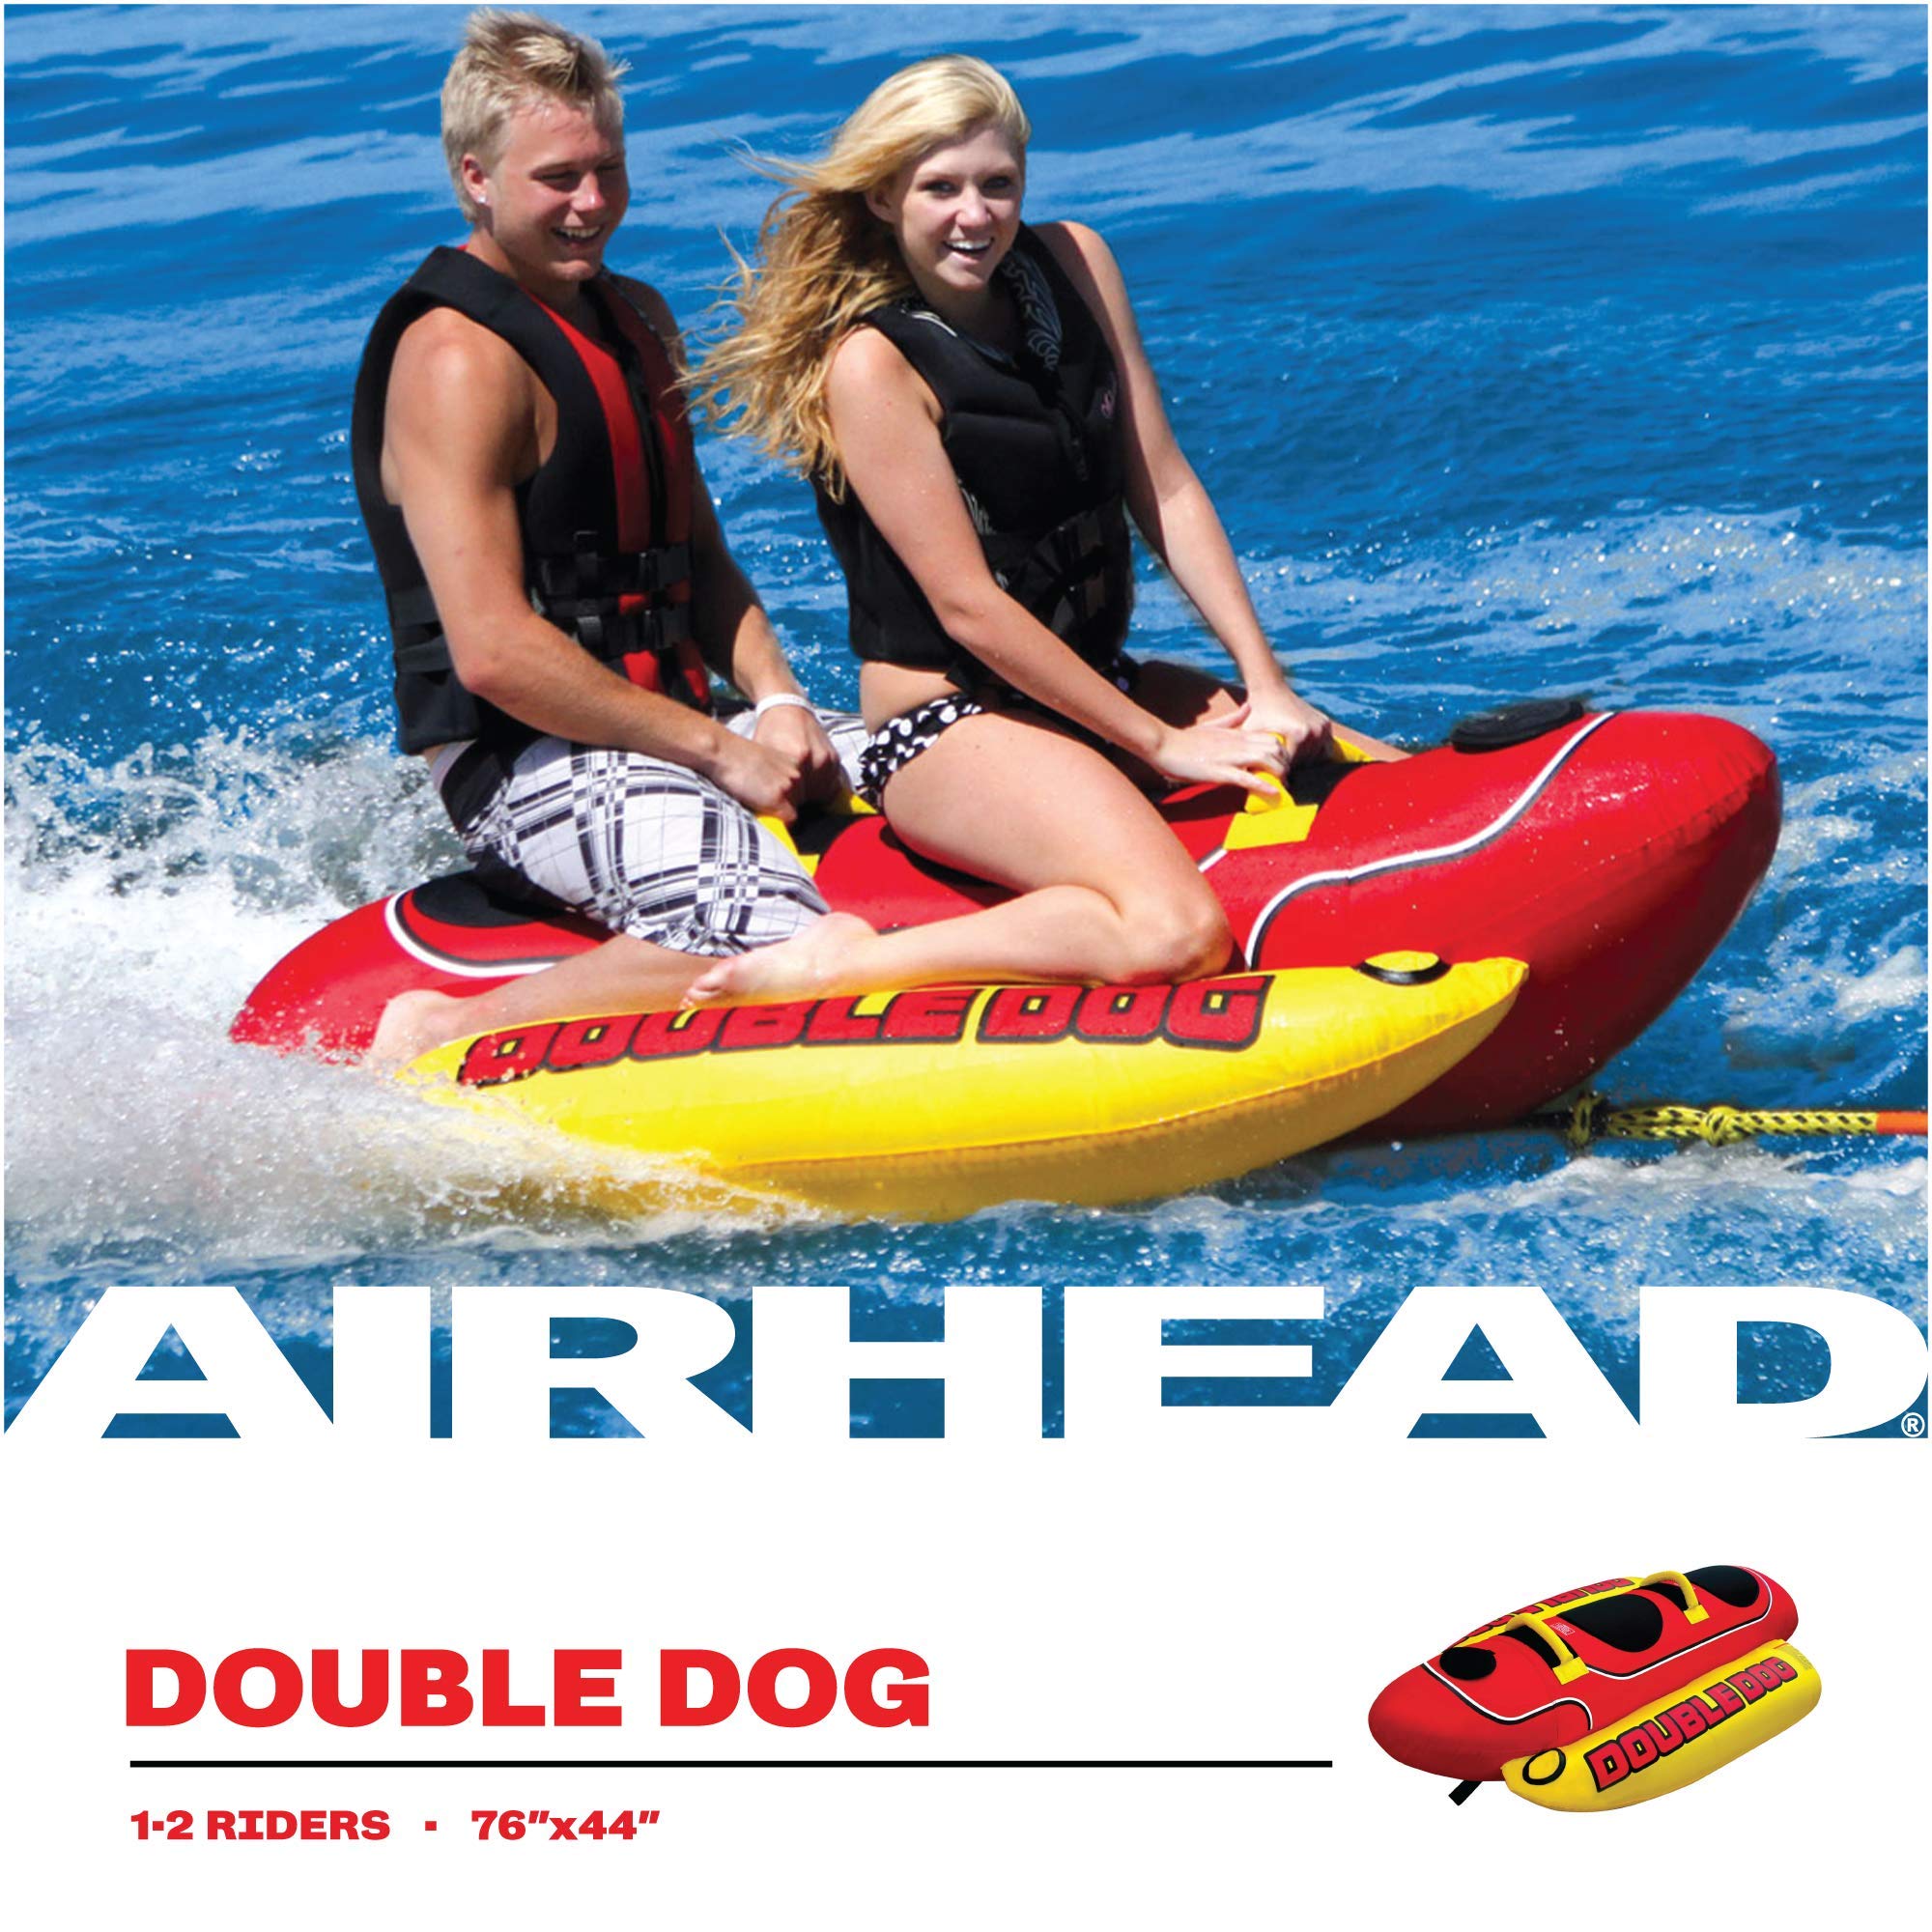 Airhead Double Dog Towable 1-2 Rider Tube for Boating and Water Sports, Double-Stitched Full Nylon Cover, EVA Padding & Padded Handles for Comfort